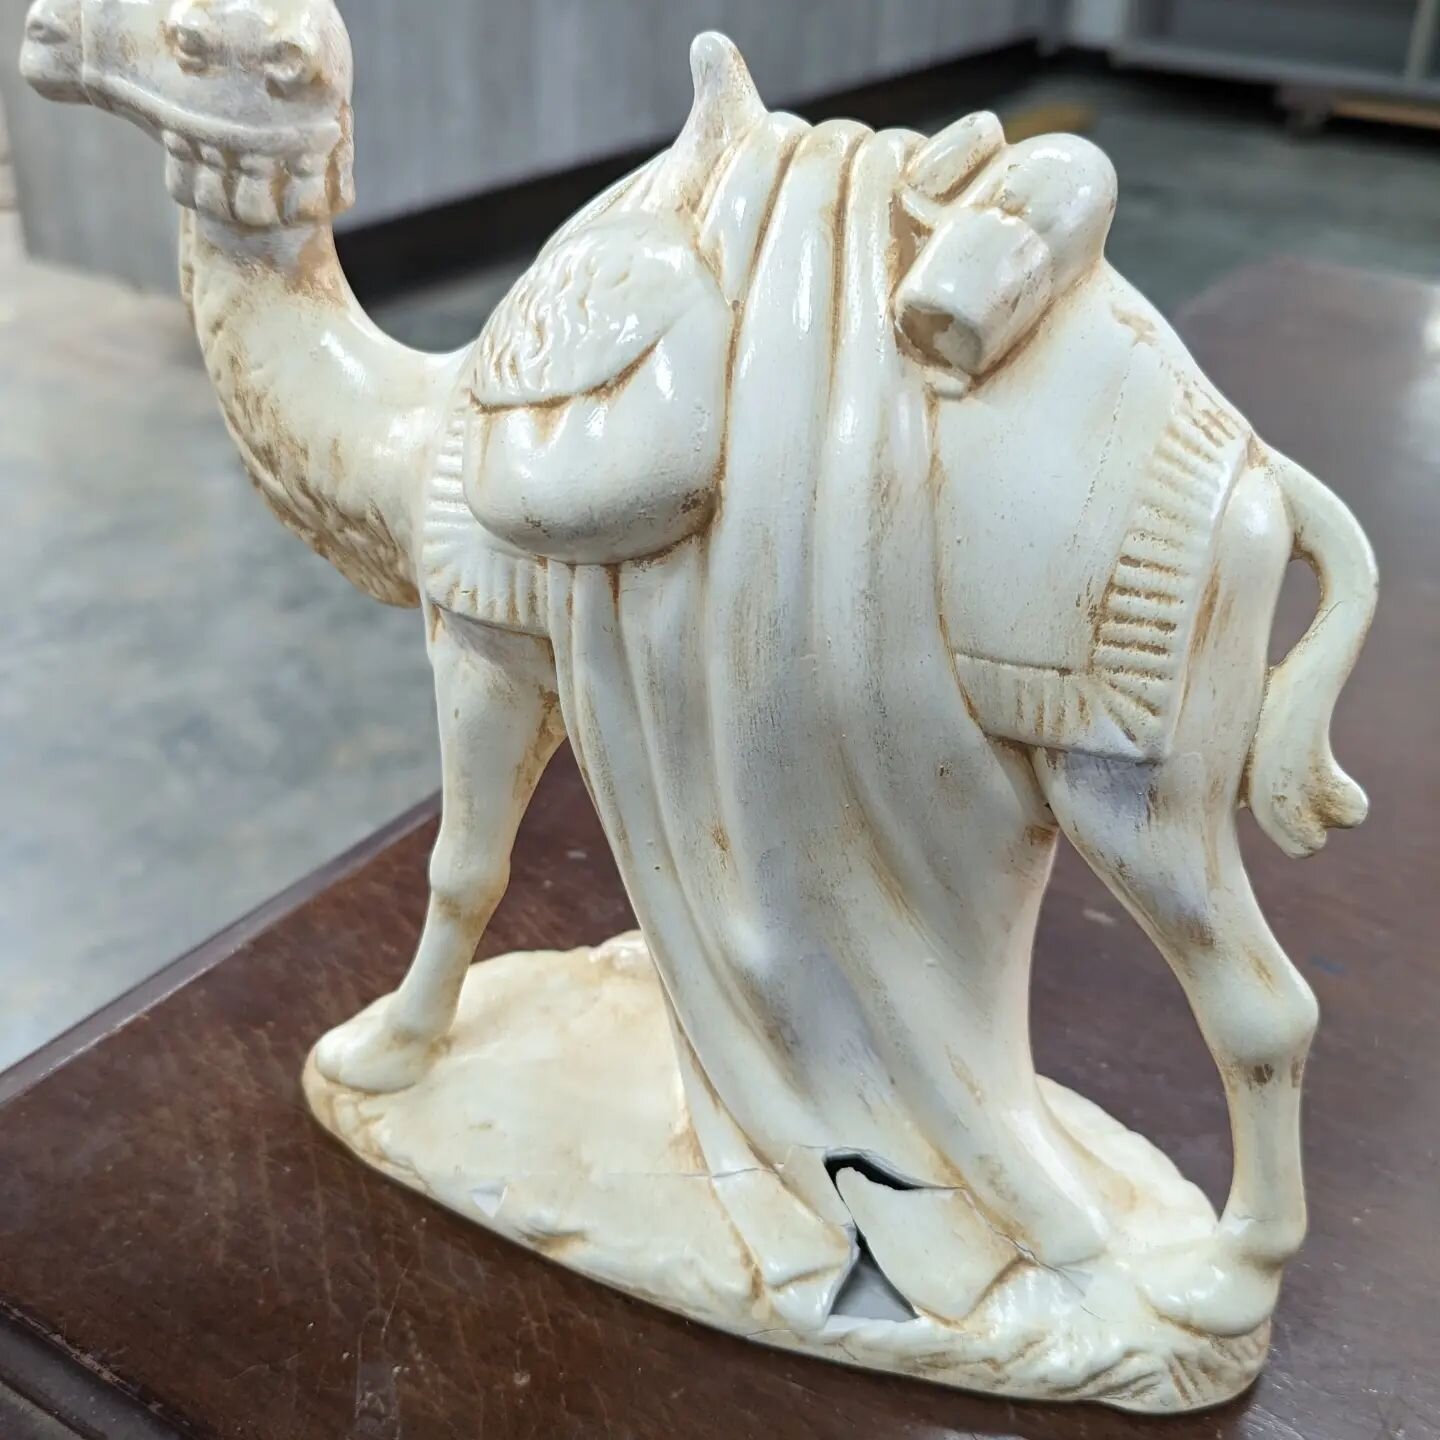 Repairs to 9 of a 20 piece Nativity.  Work consisted of repairing damage similar to that seen in the camel photo and augmentation to replace missing parts.

#jeffjohnsonrestorations #fatdoglaser #nativity #christian #ceramics #shoplocalraleigh #insta